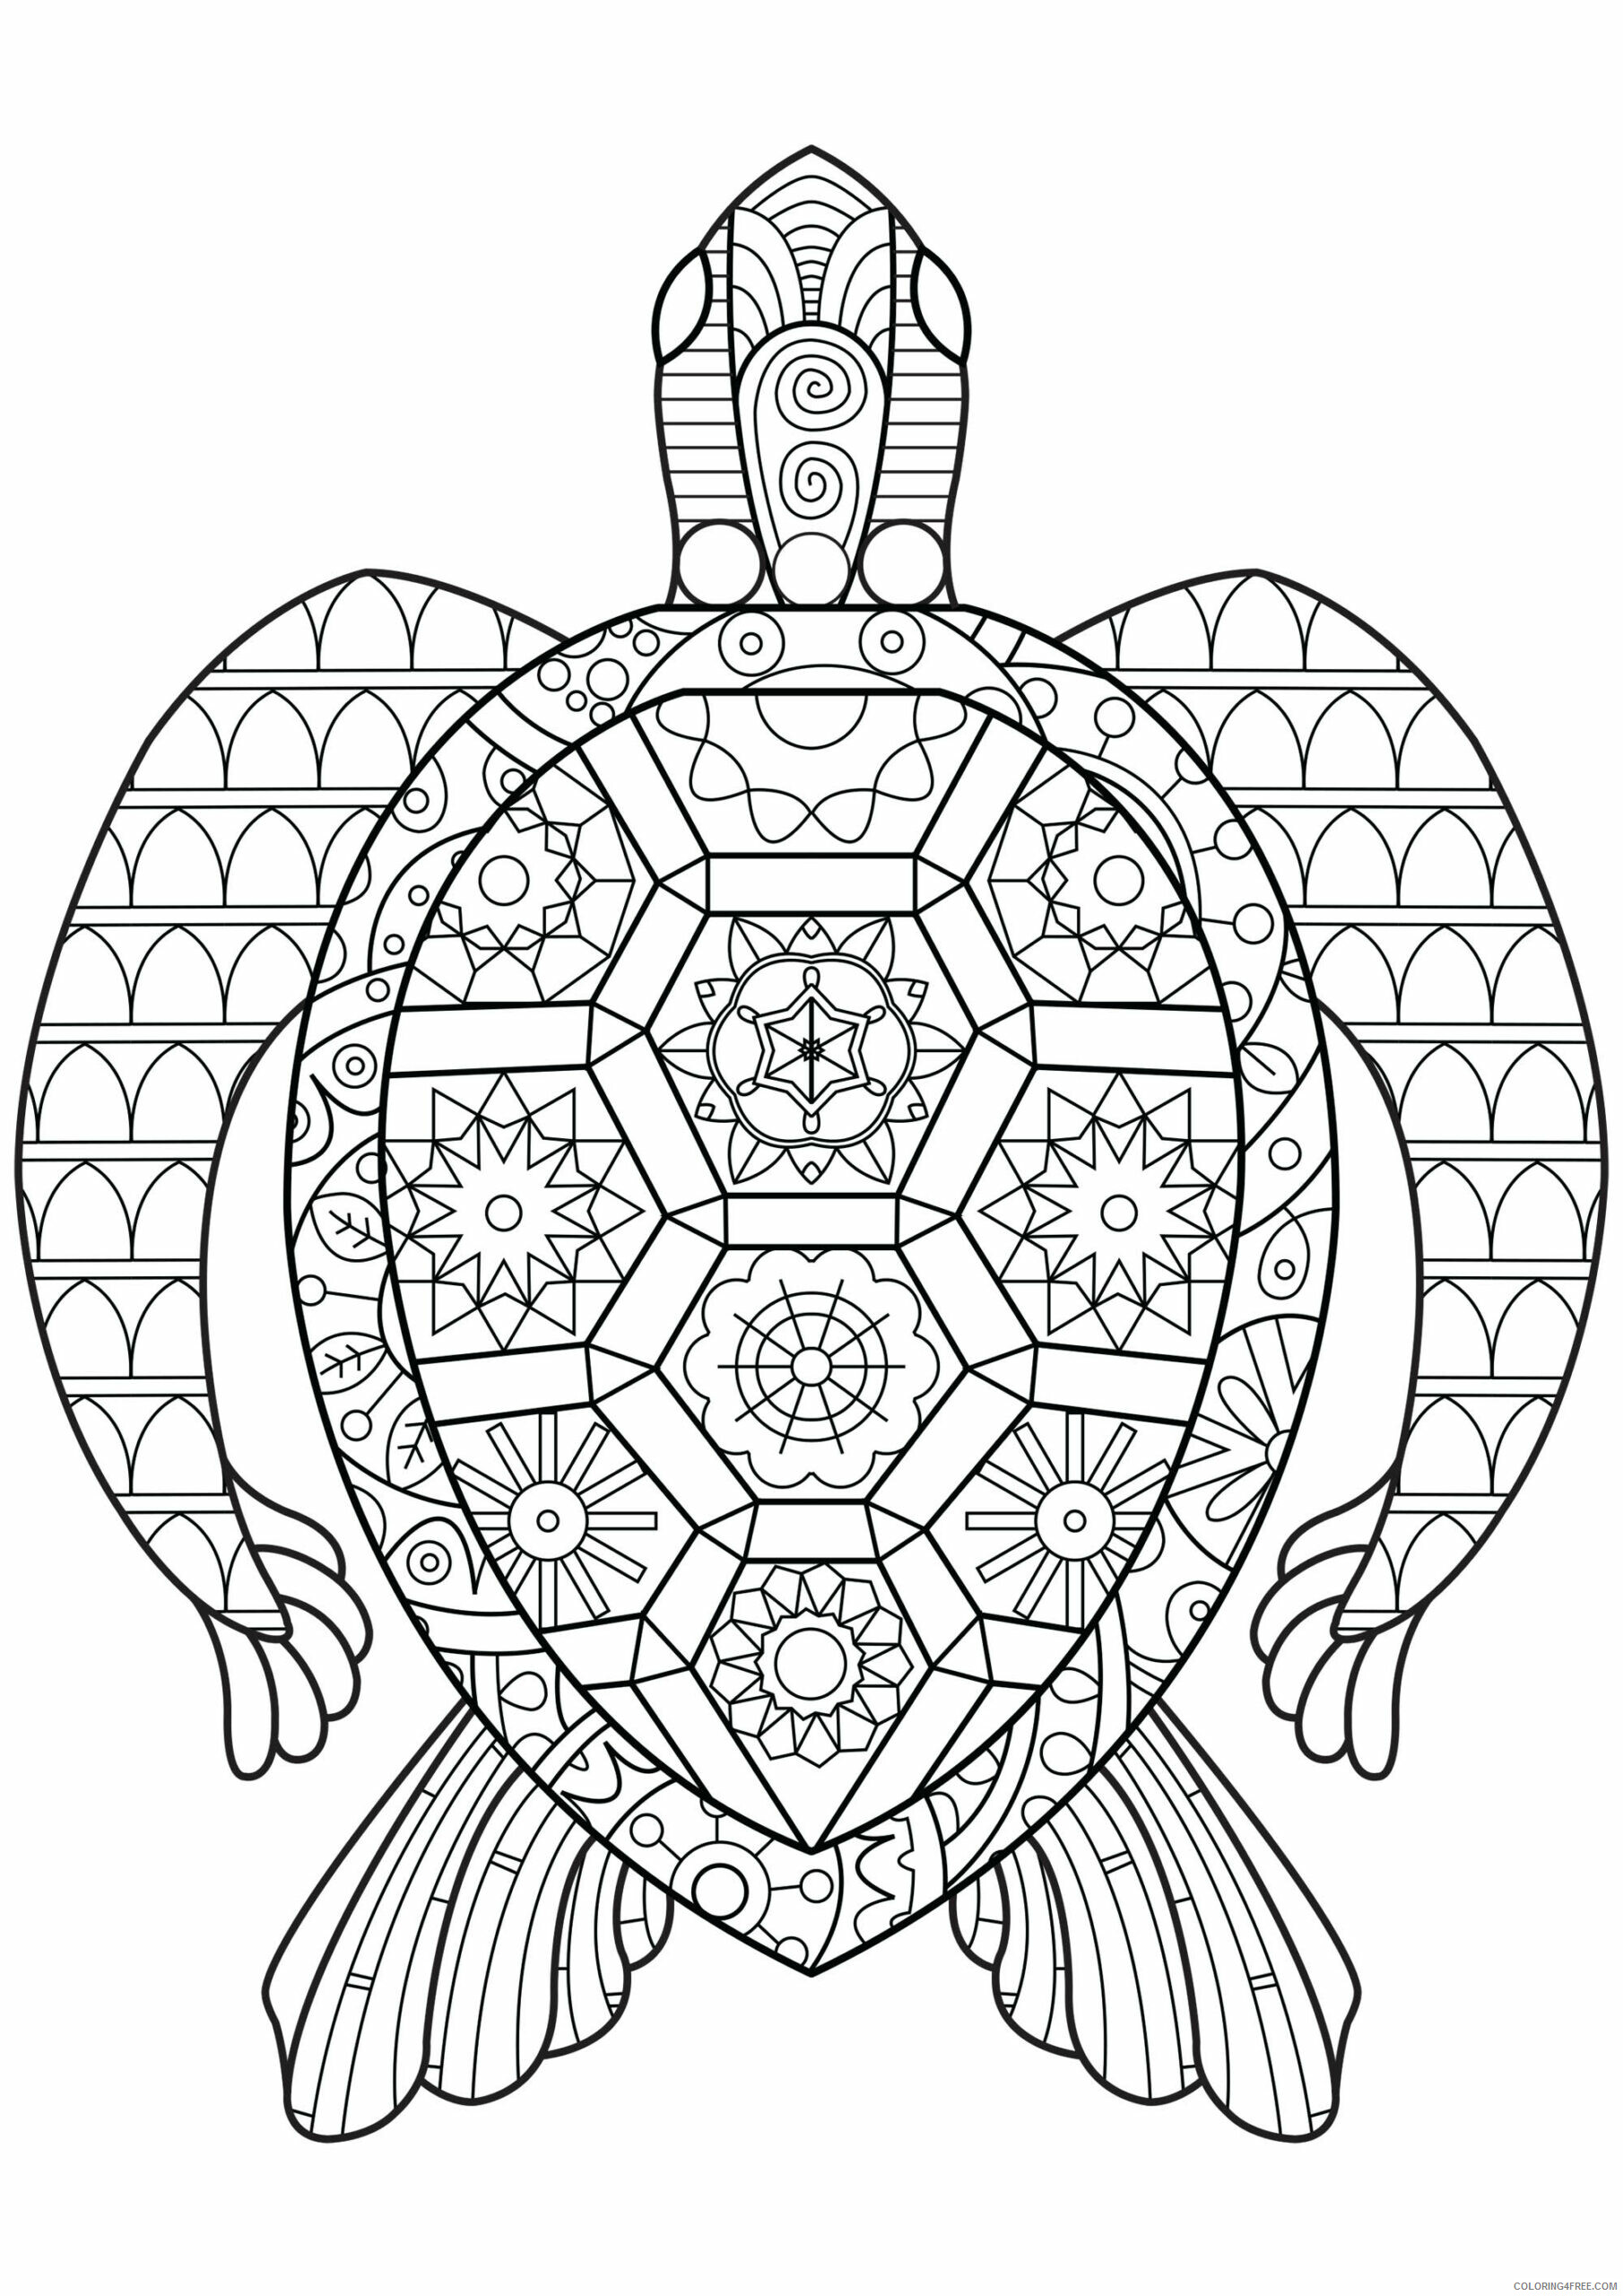 Reptile Coloring Pages Animal Printable Sheets Zen Turtle Pattern Reptile 2021 Coloring4free